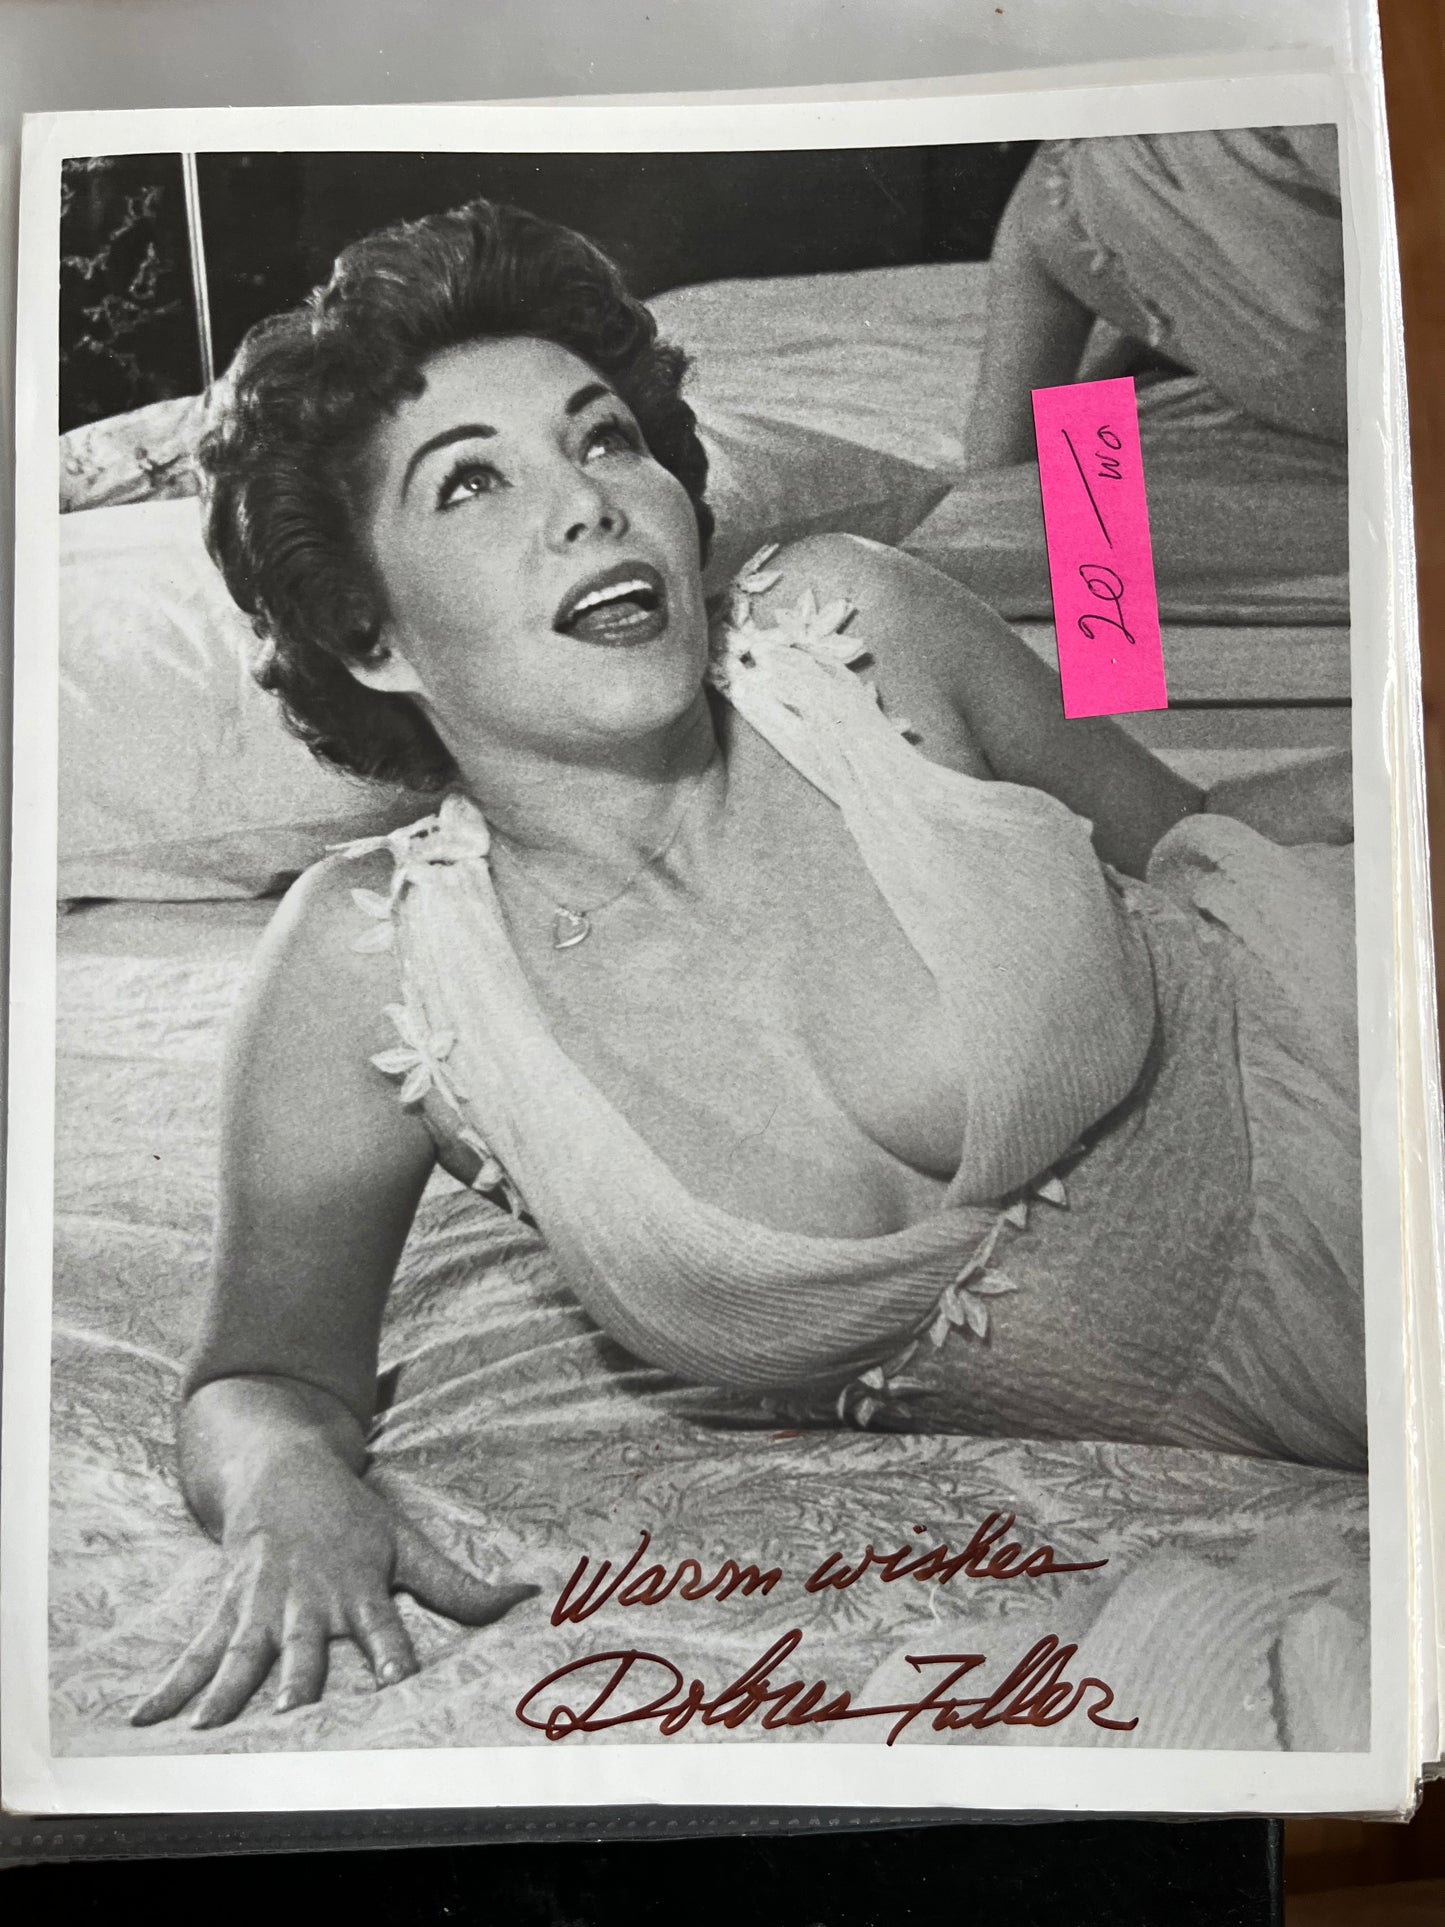 DOLORES FULLER, Ed Wood actress, autograph